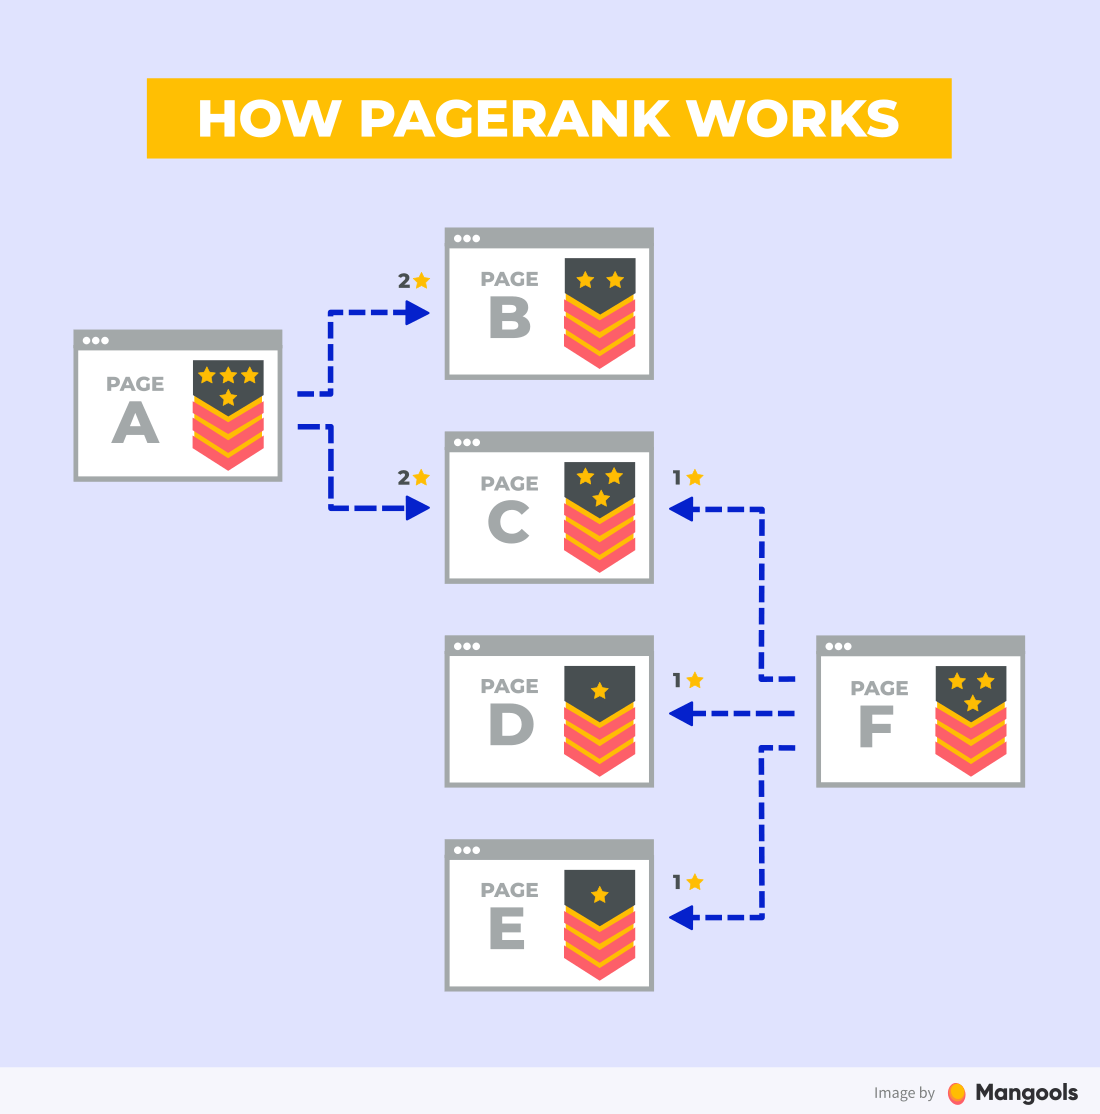 How PageRank works